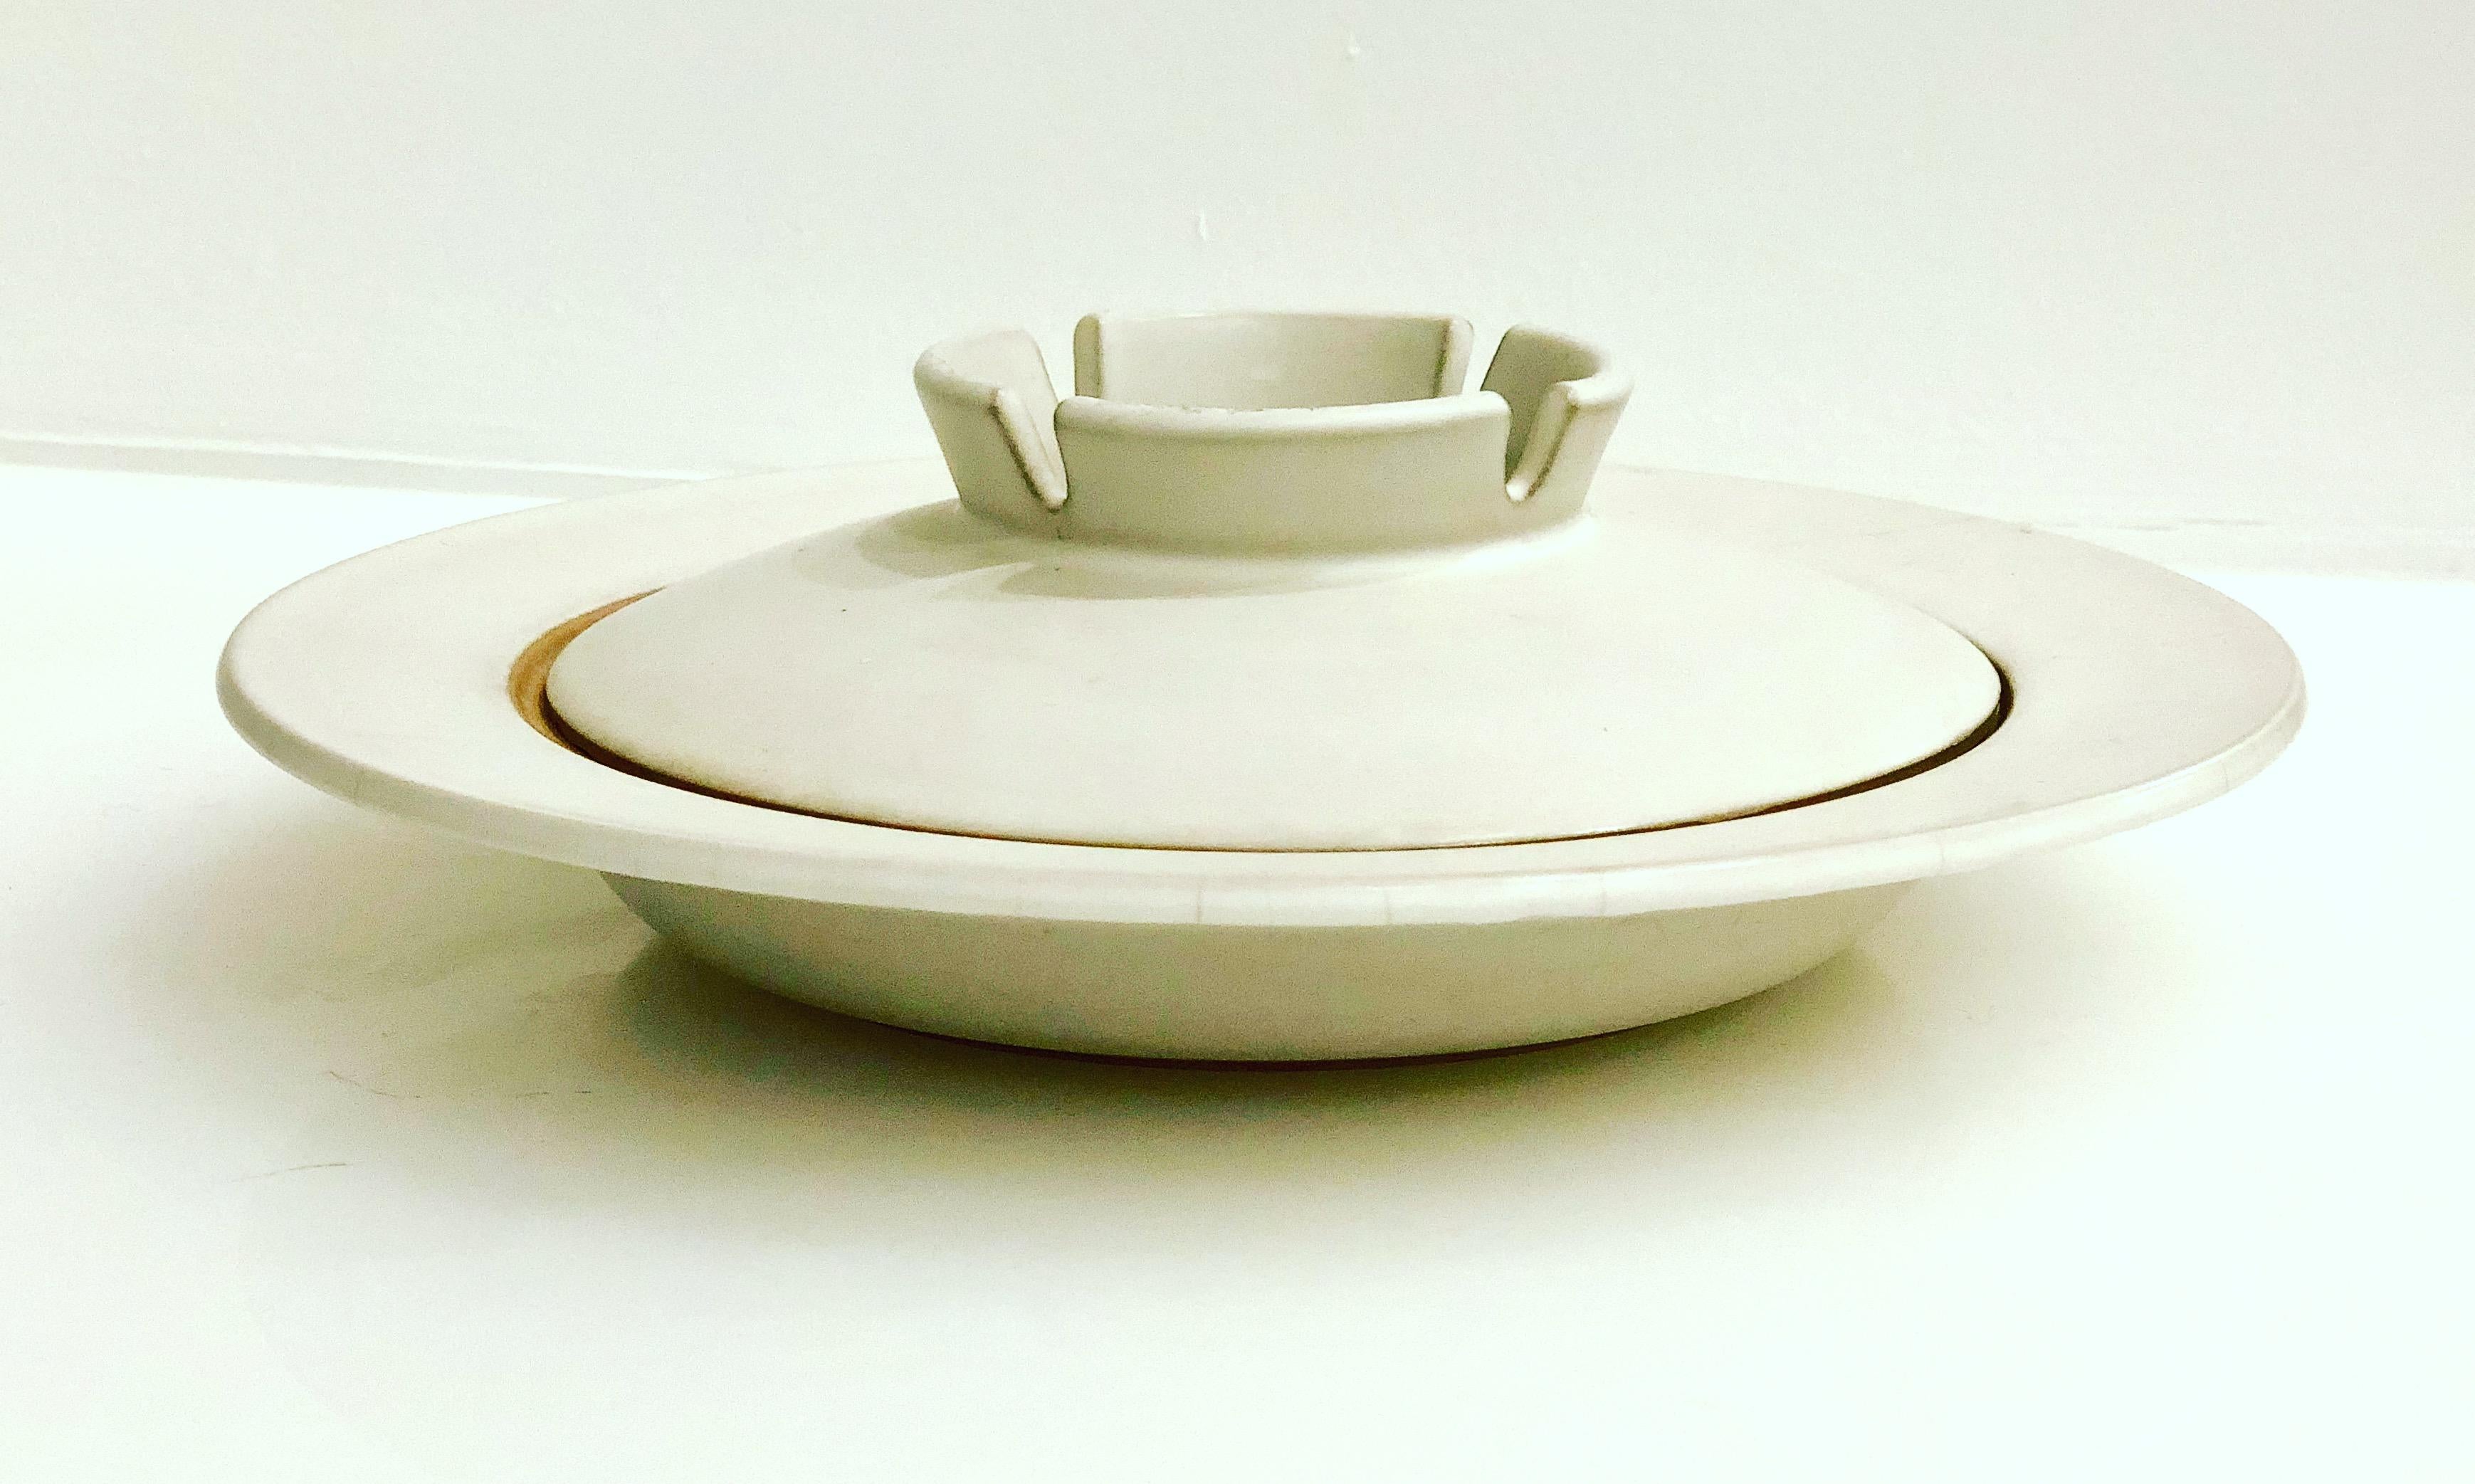 A very rare midcentury Nelson stoneware large ceramic ashtray with removable lid. In a crackle finish. handcrafted by Showa. UFO shape, an iconic Classic of the atomic age era.